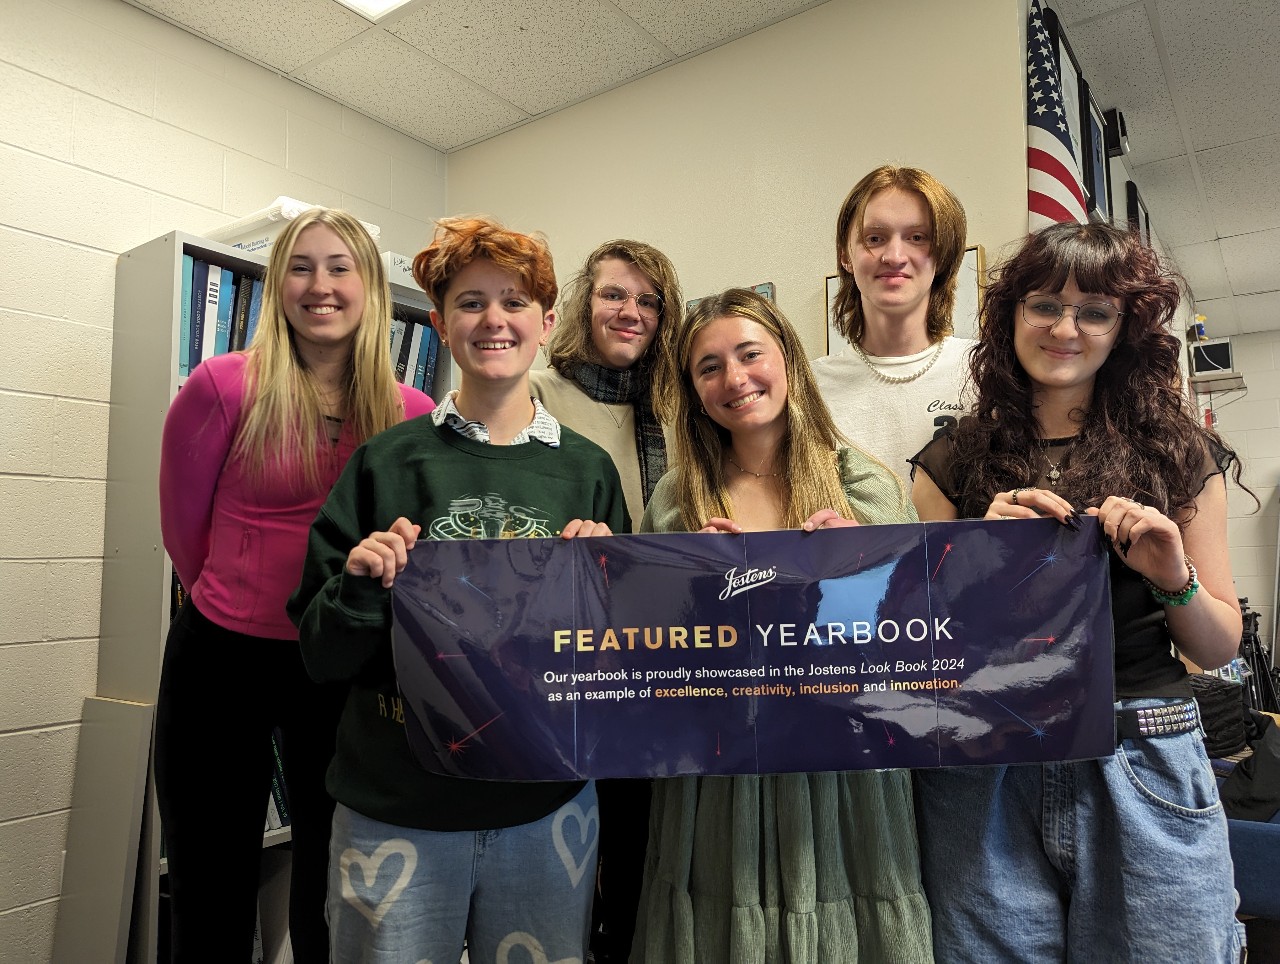 Students holding banner that says, "Featured Yearbook"